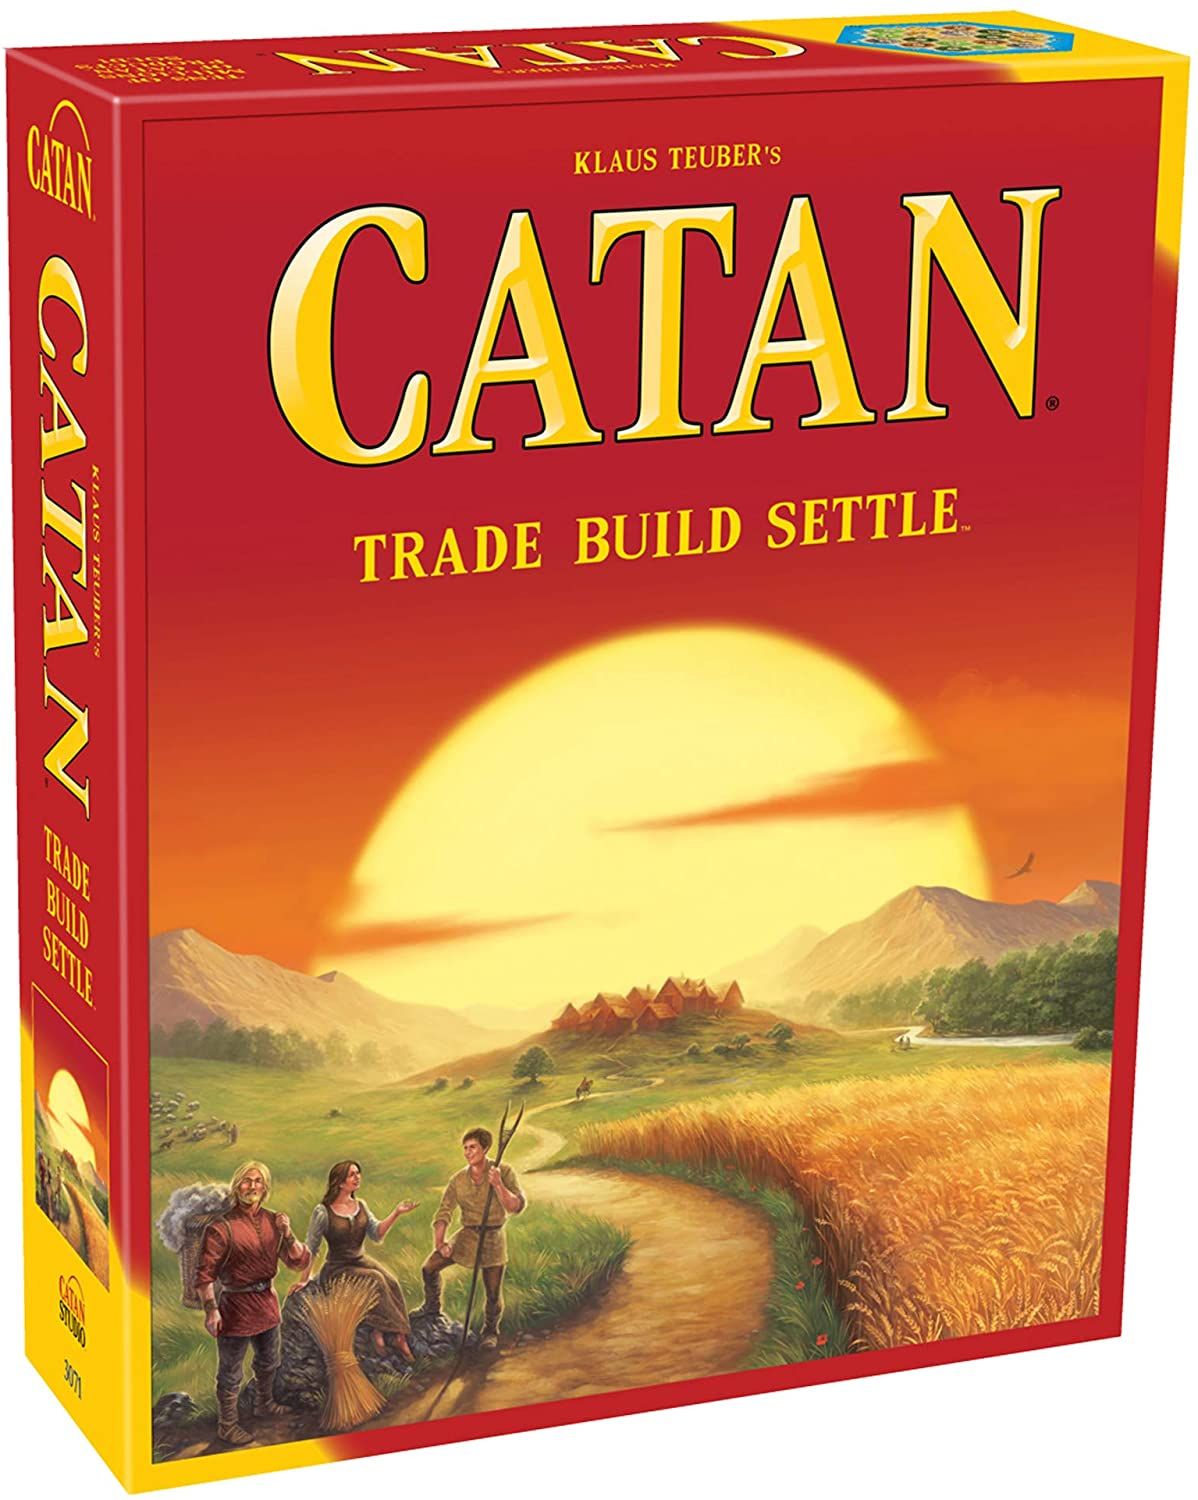 The Catan base game box features a group of people coming to settle Catan.